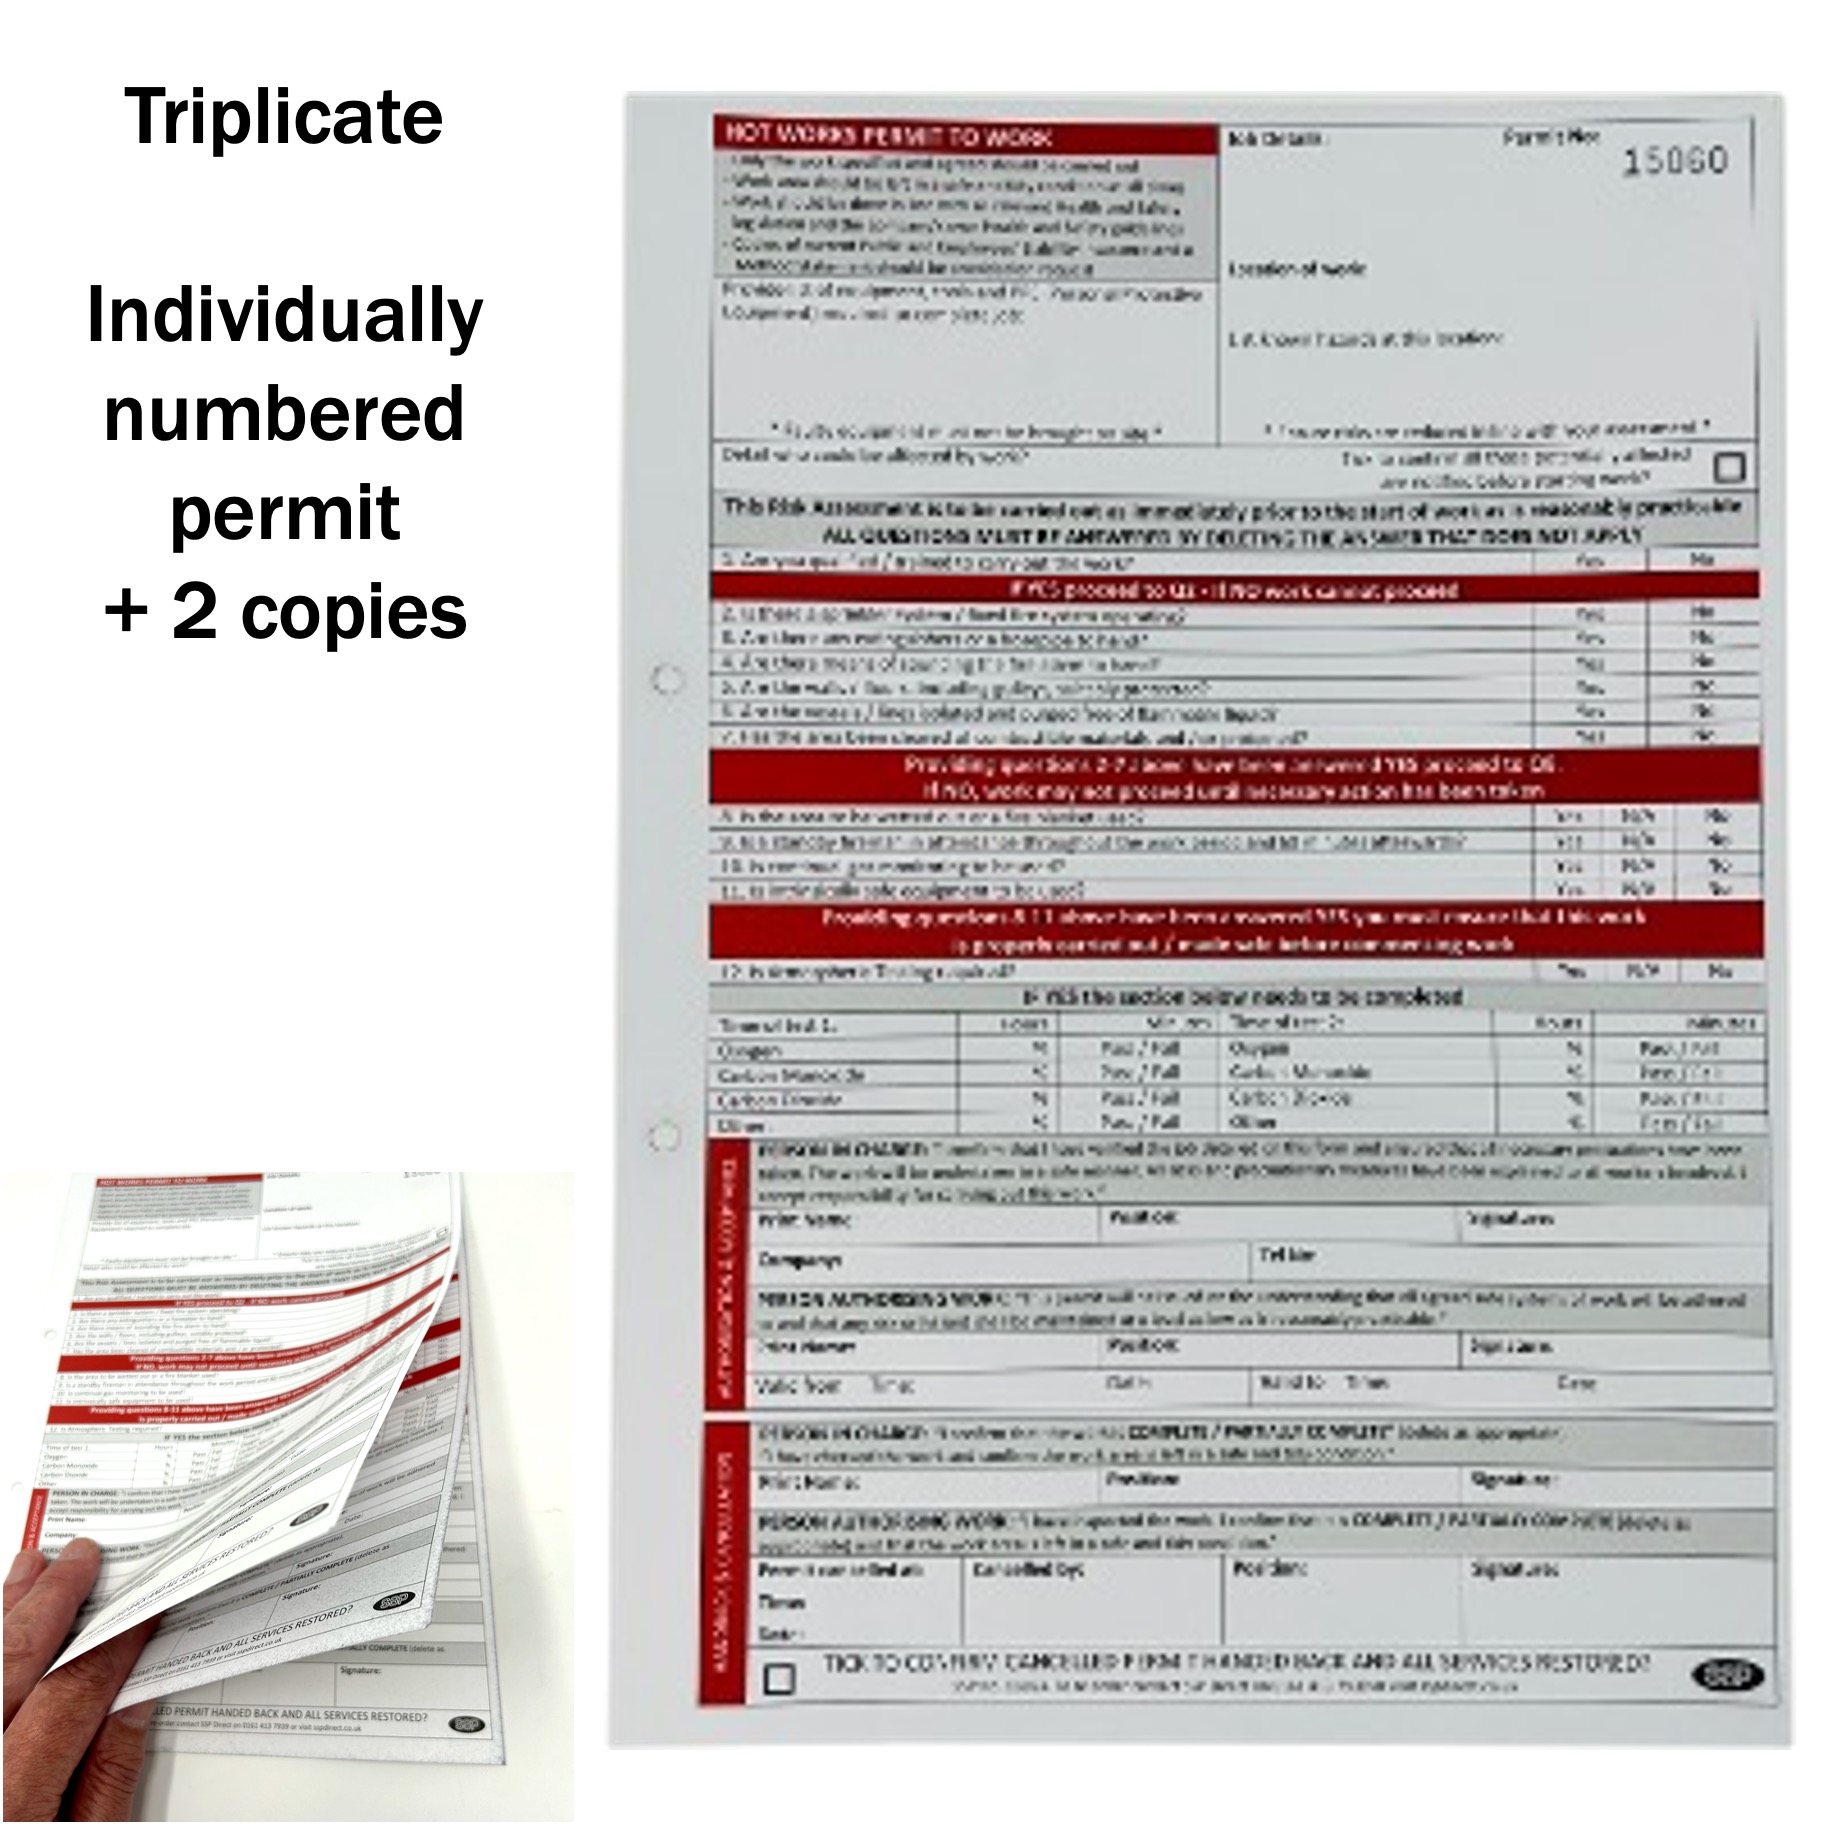 Hot Works Permit To Work - Duplicating 